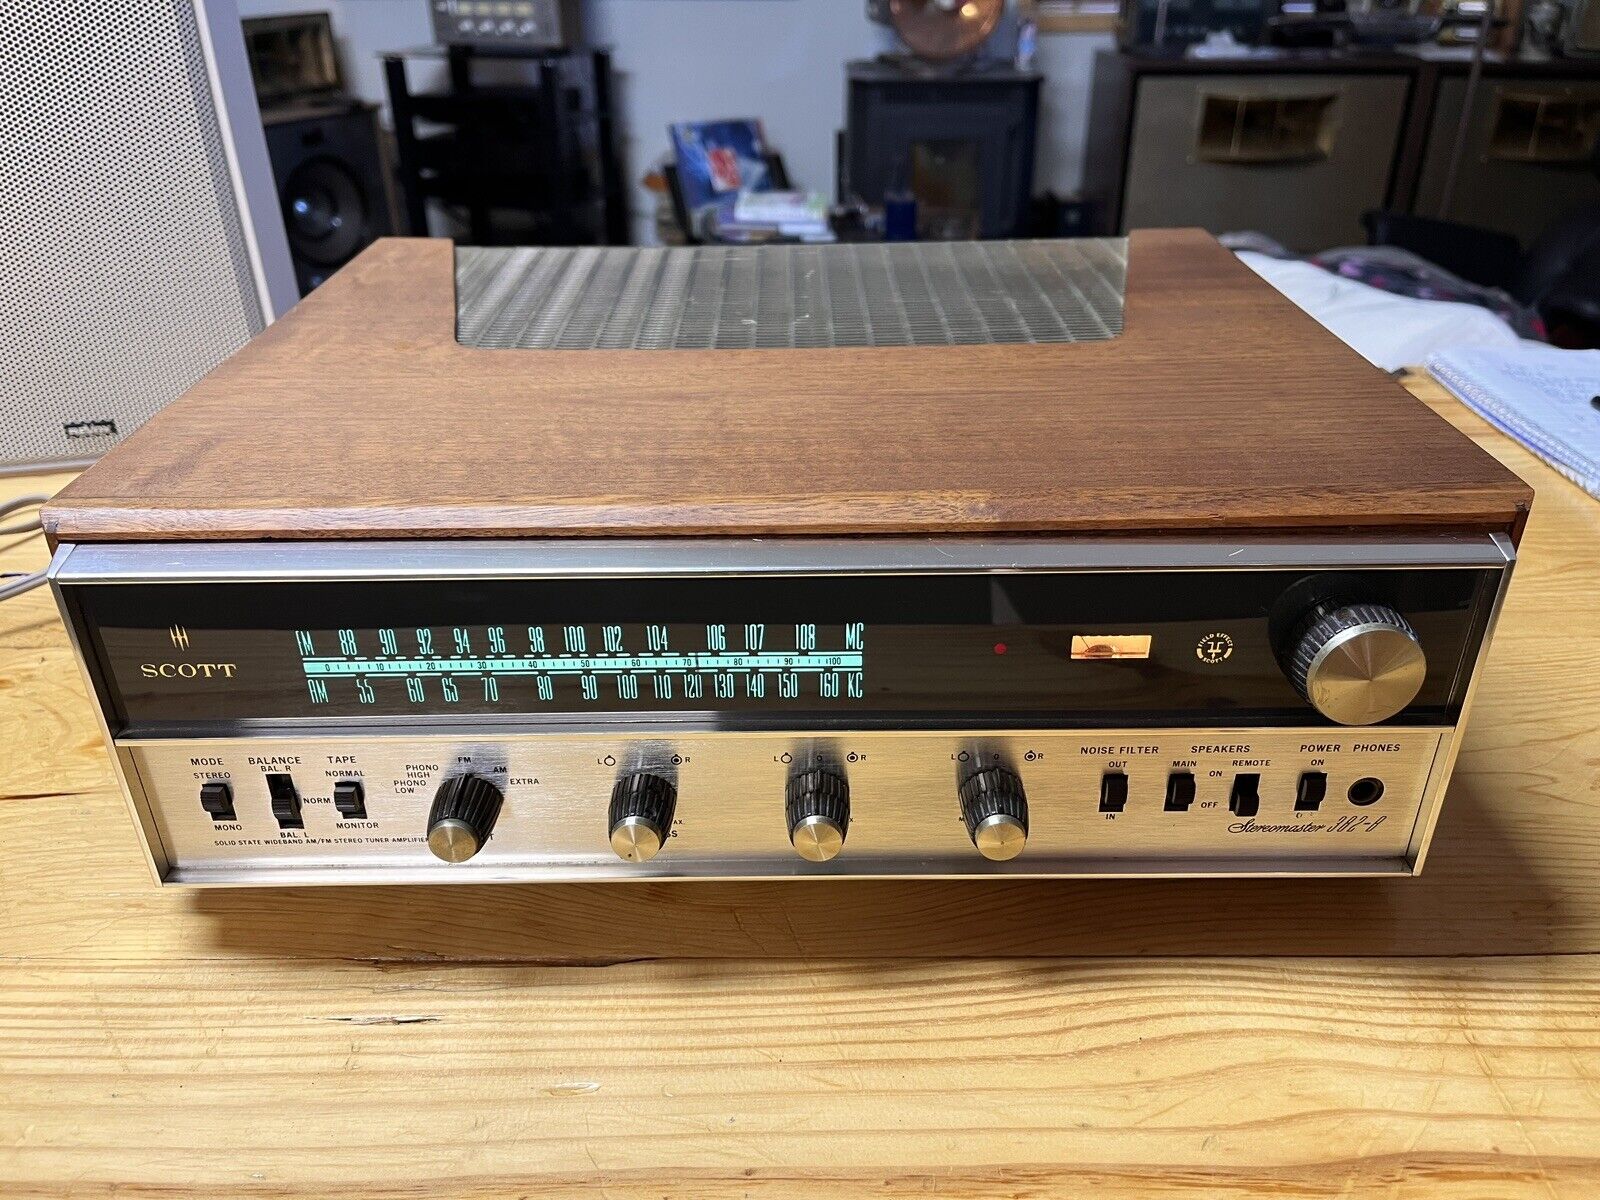 SCOTT STEREOMASTER 382-B VINTAGE STEREO RECEIVER - W Cabinet AS-IS For Parts